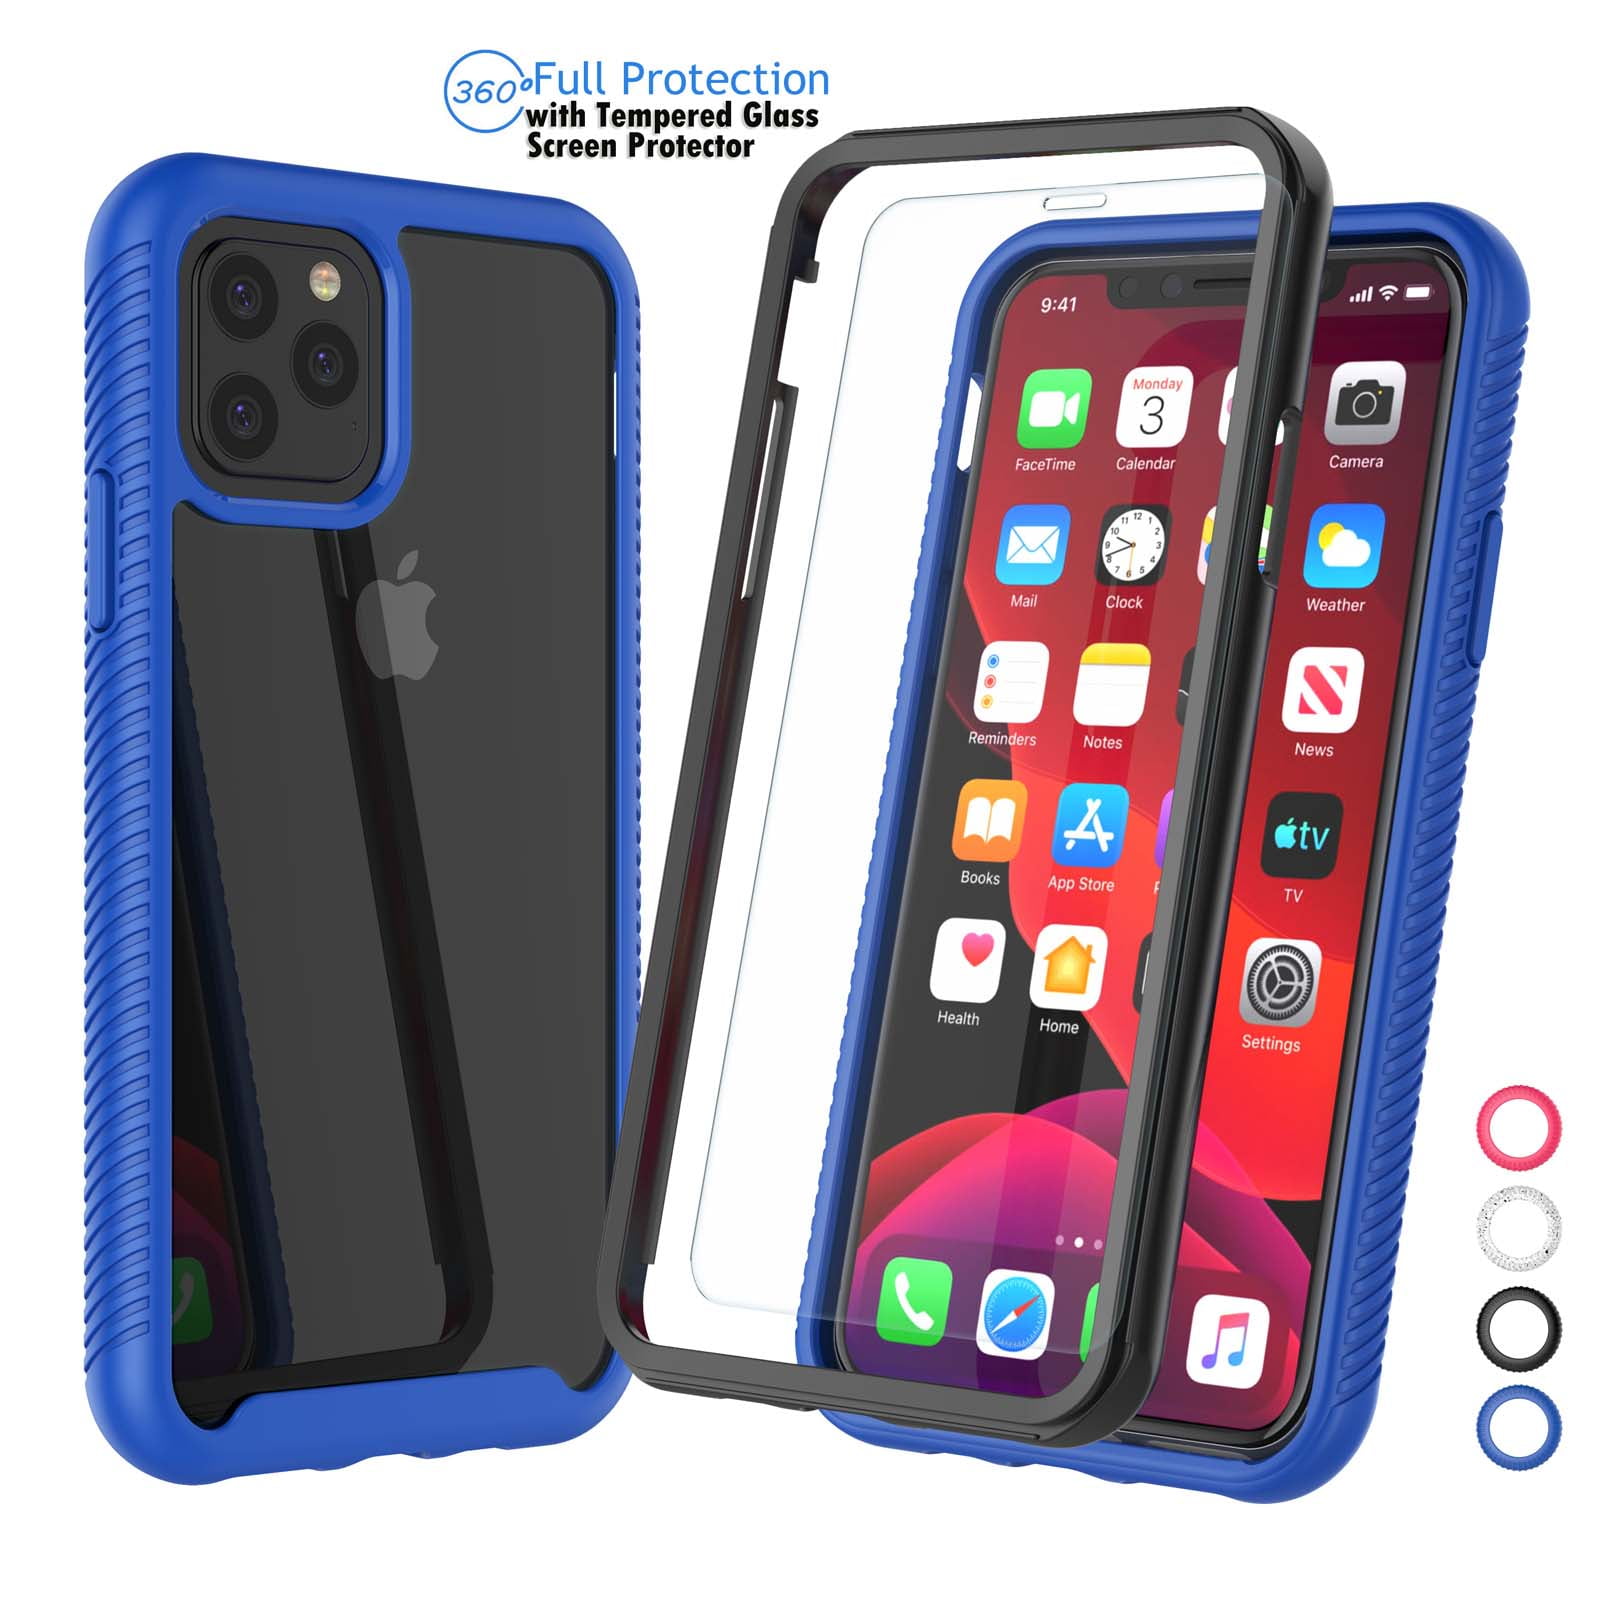 For iPhone 11/XI Pro Max 6.5 Waterproof Shockproof Life Case Screen Protector 